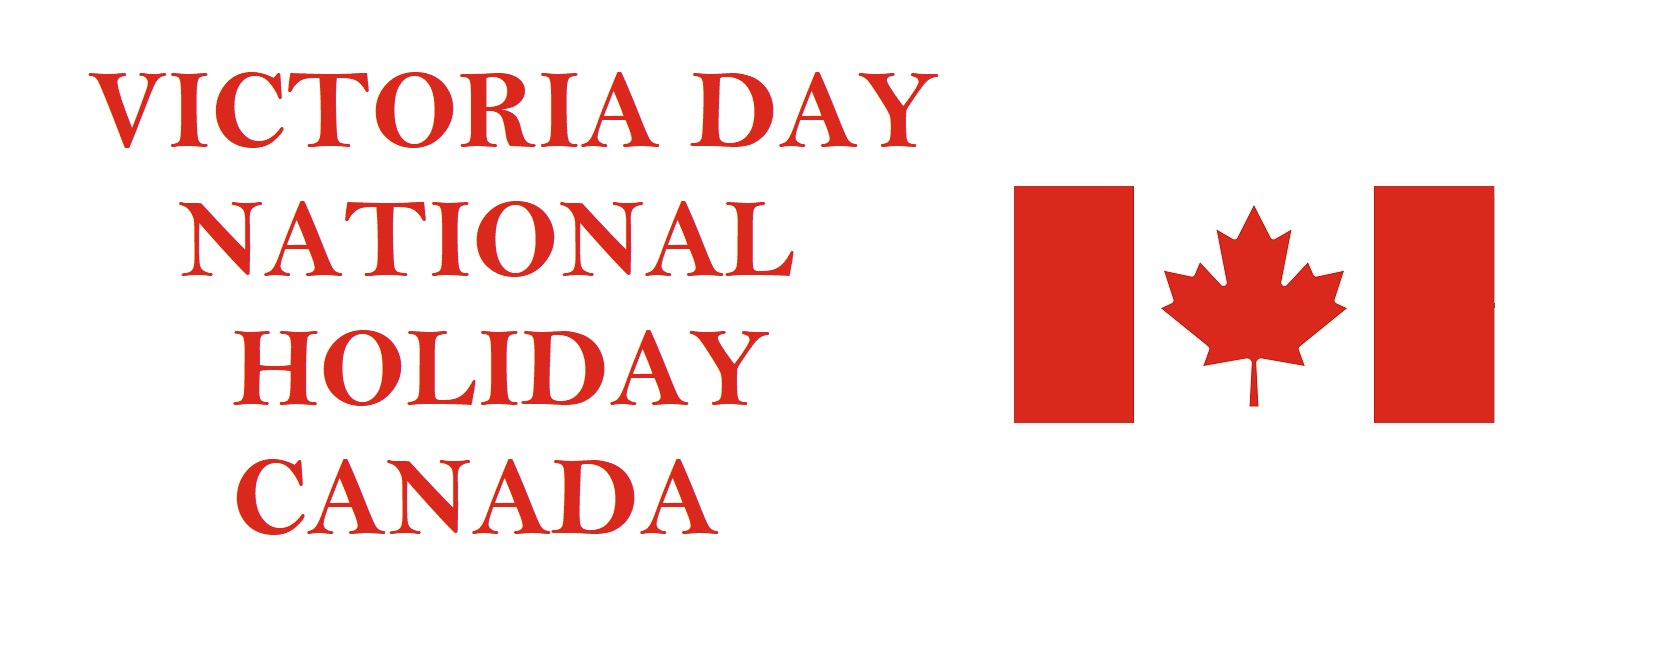 Victoria Day National Holiday, Canada